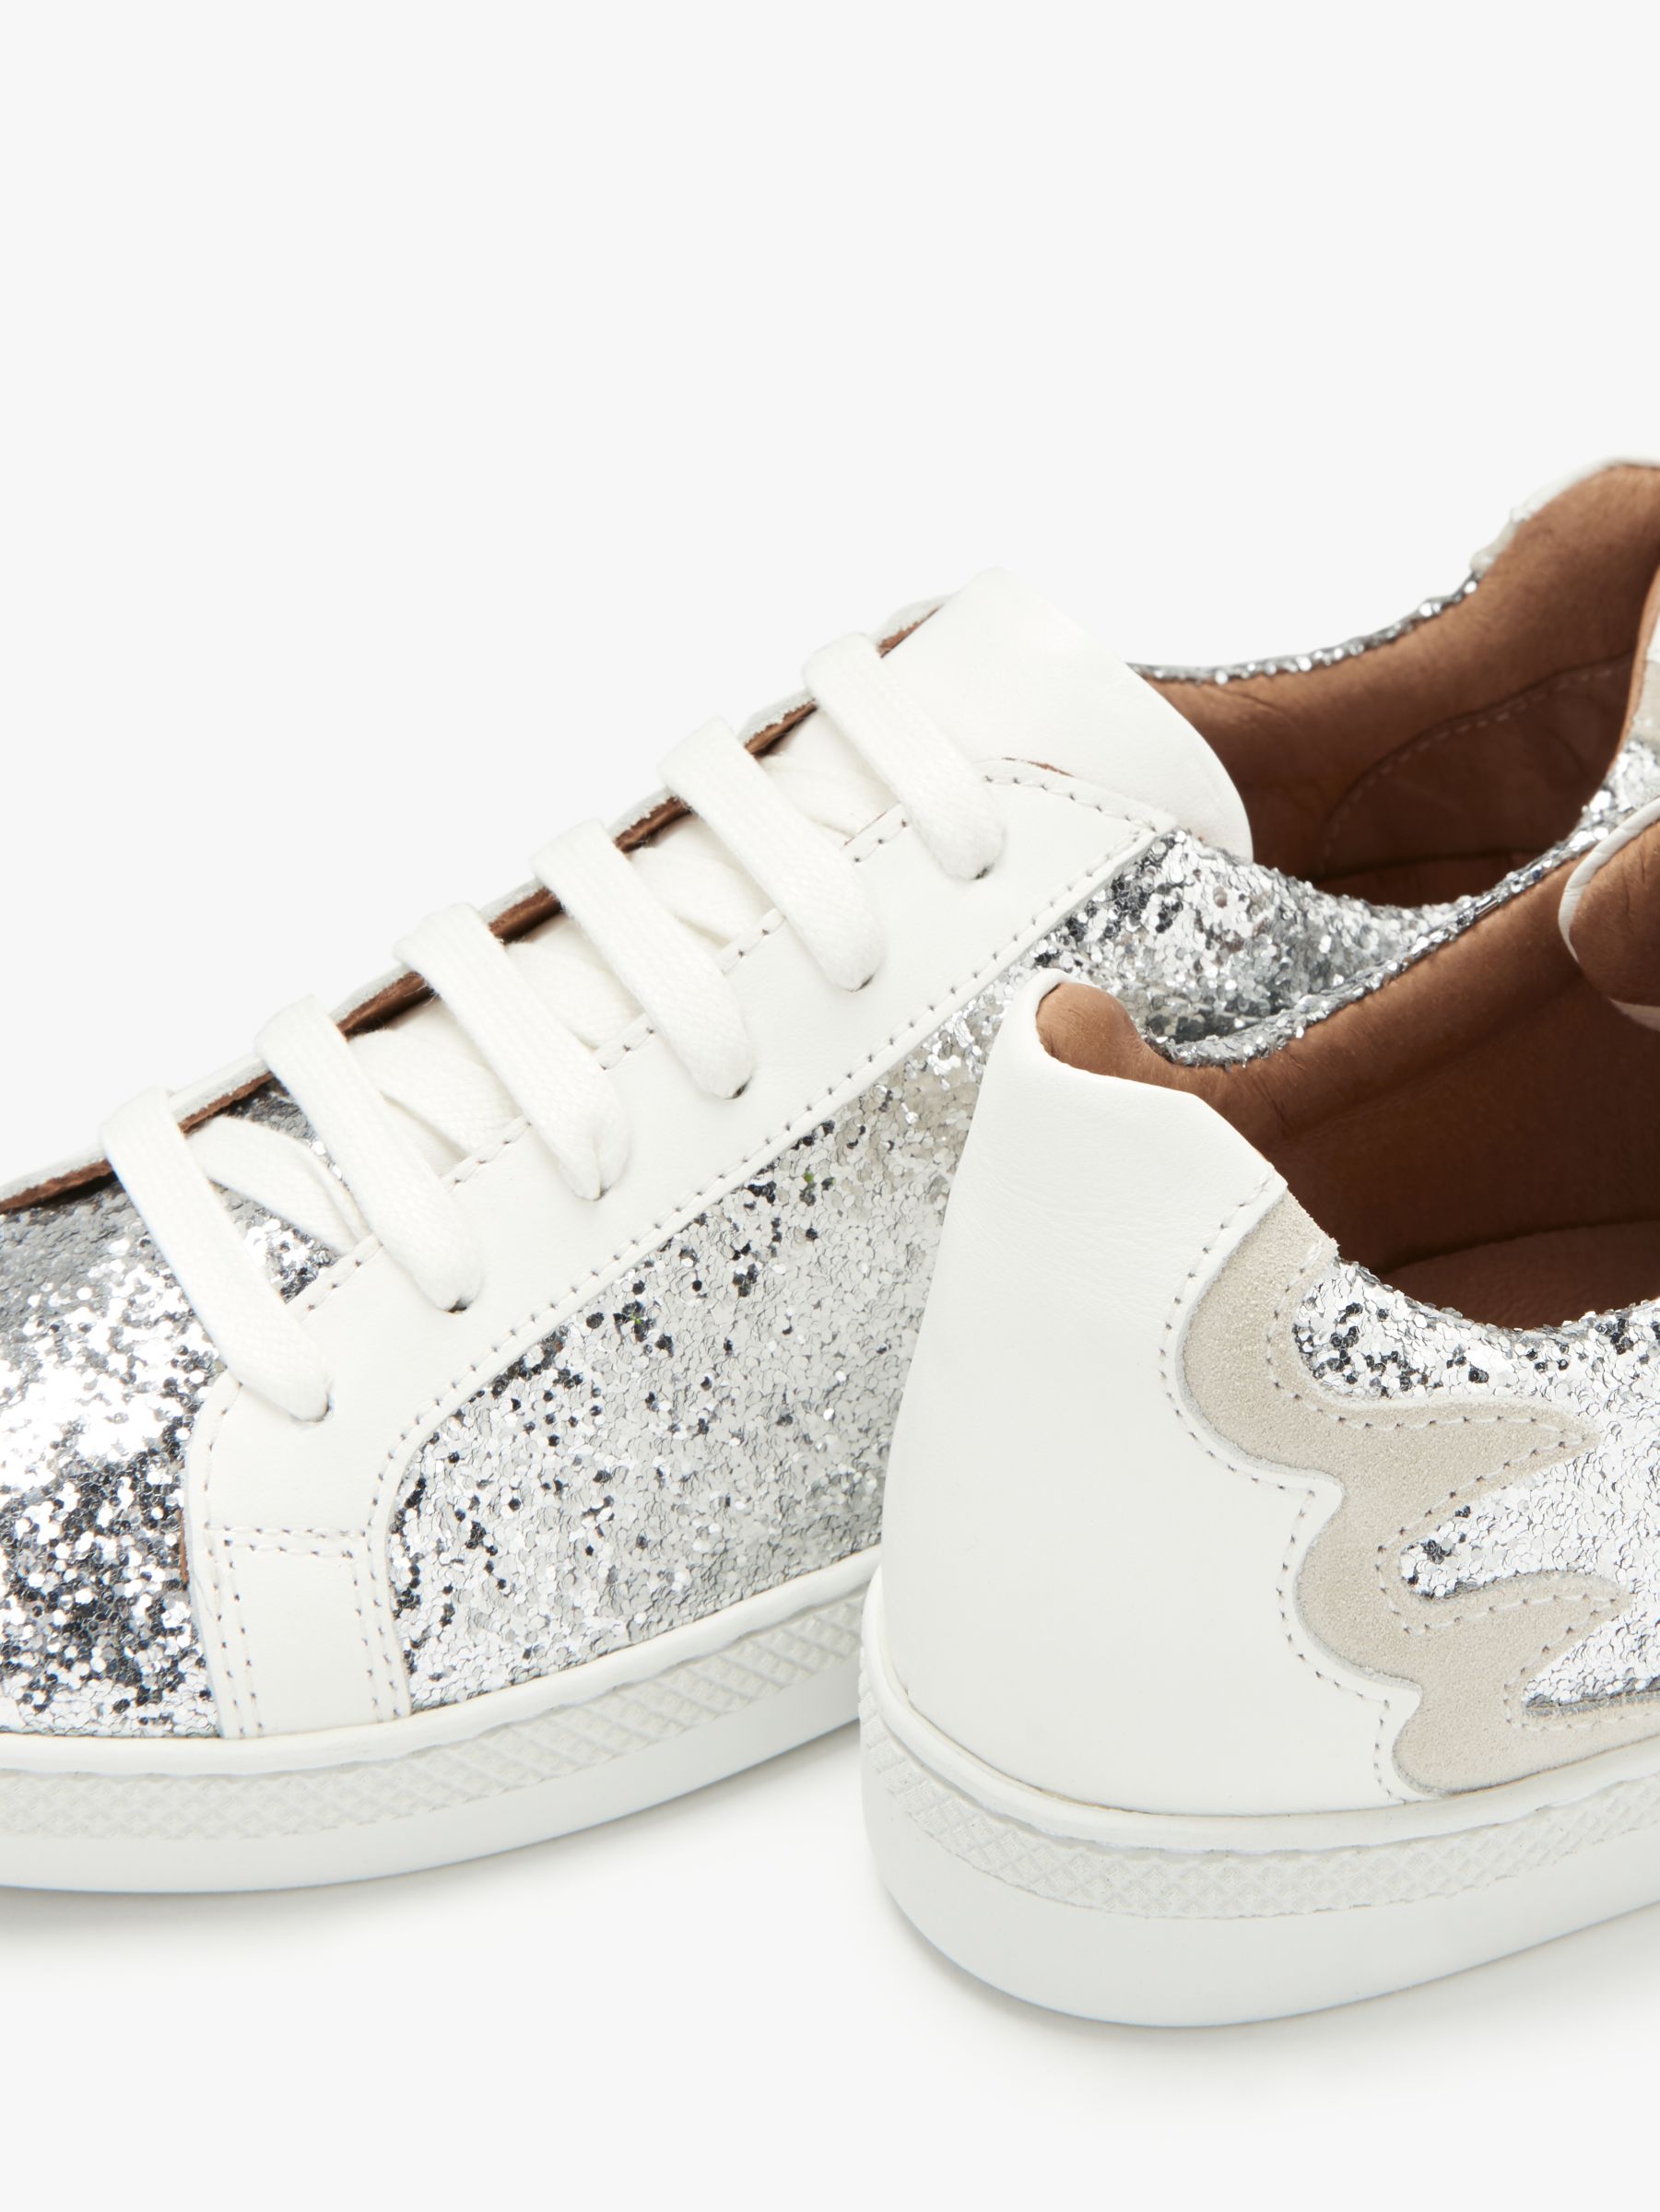 AND/OR Elsie Glitter Trainers, Silver Leather at John Lewis & Partners